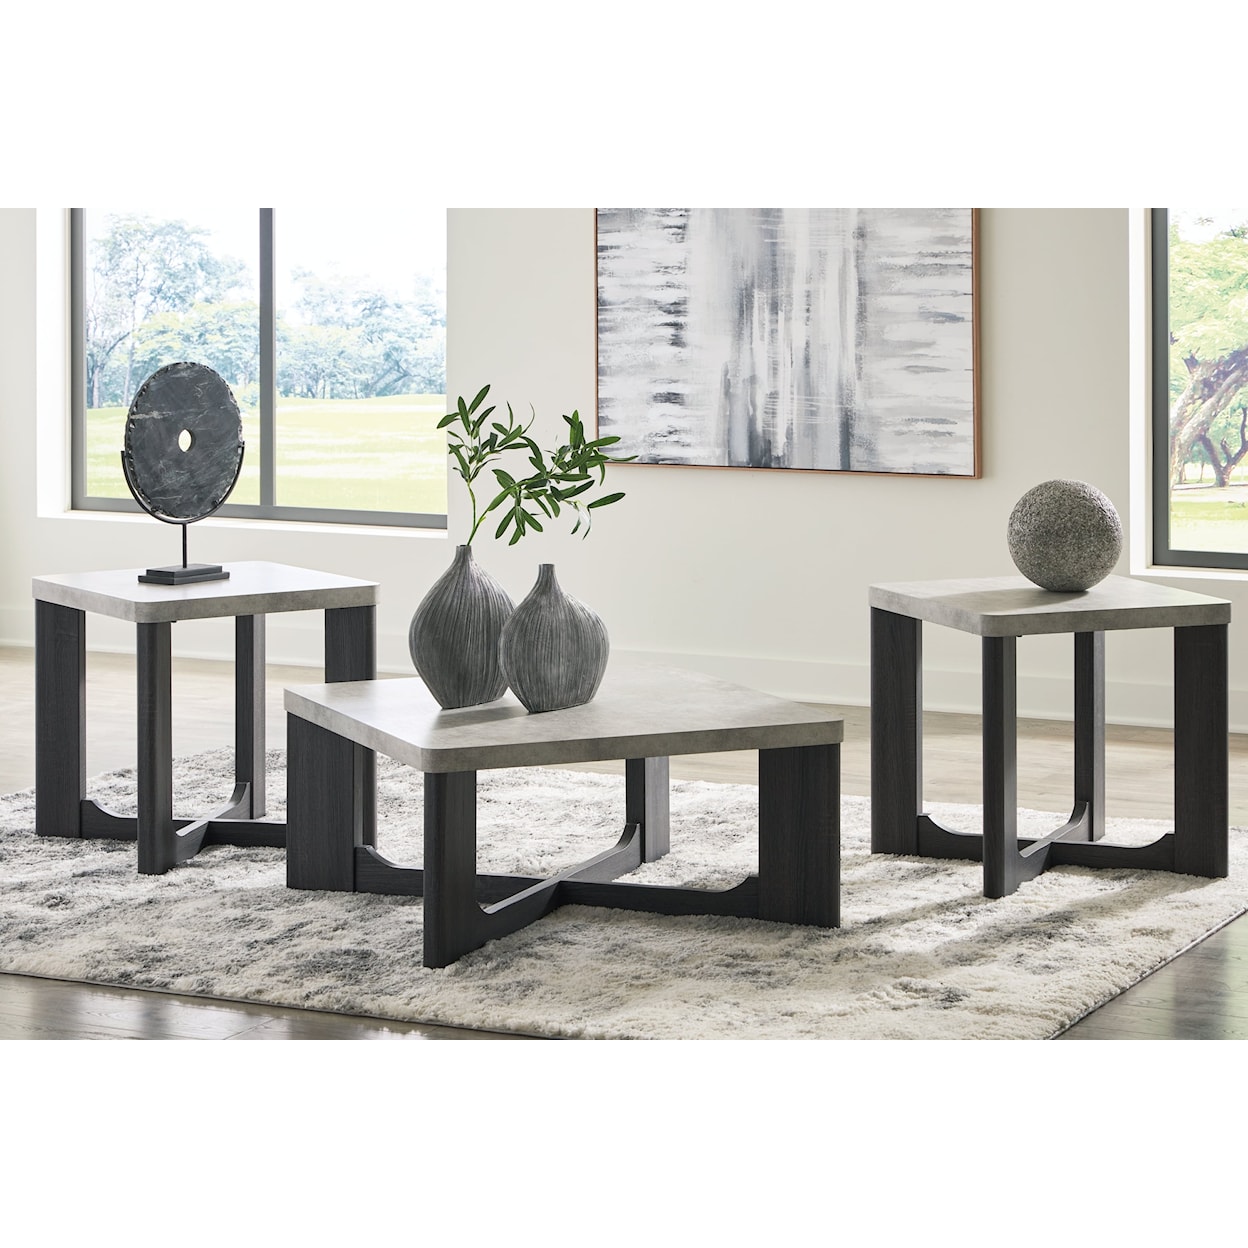 Signature Design by Ashley Sharstorm Occasional Table Set